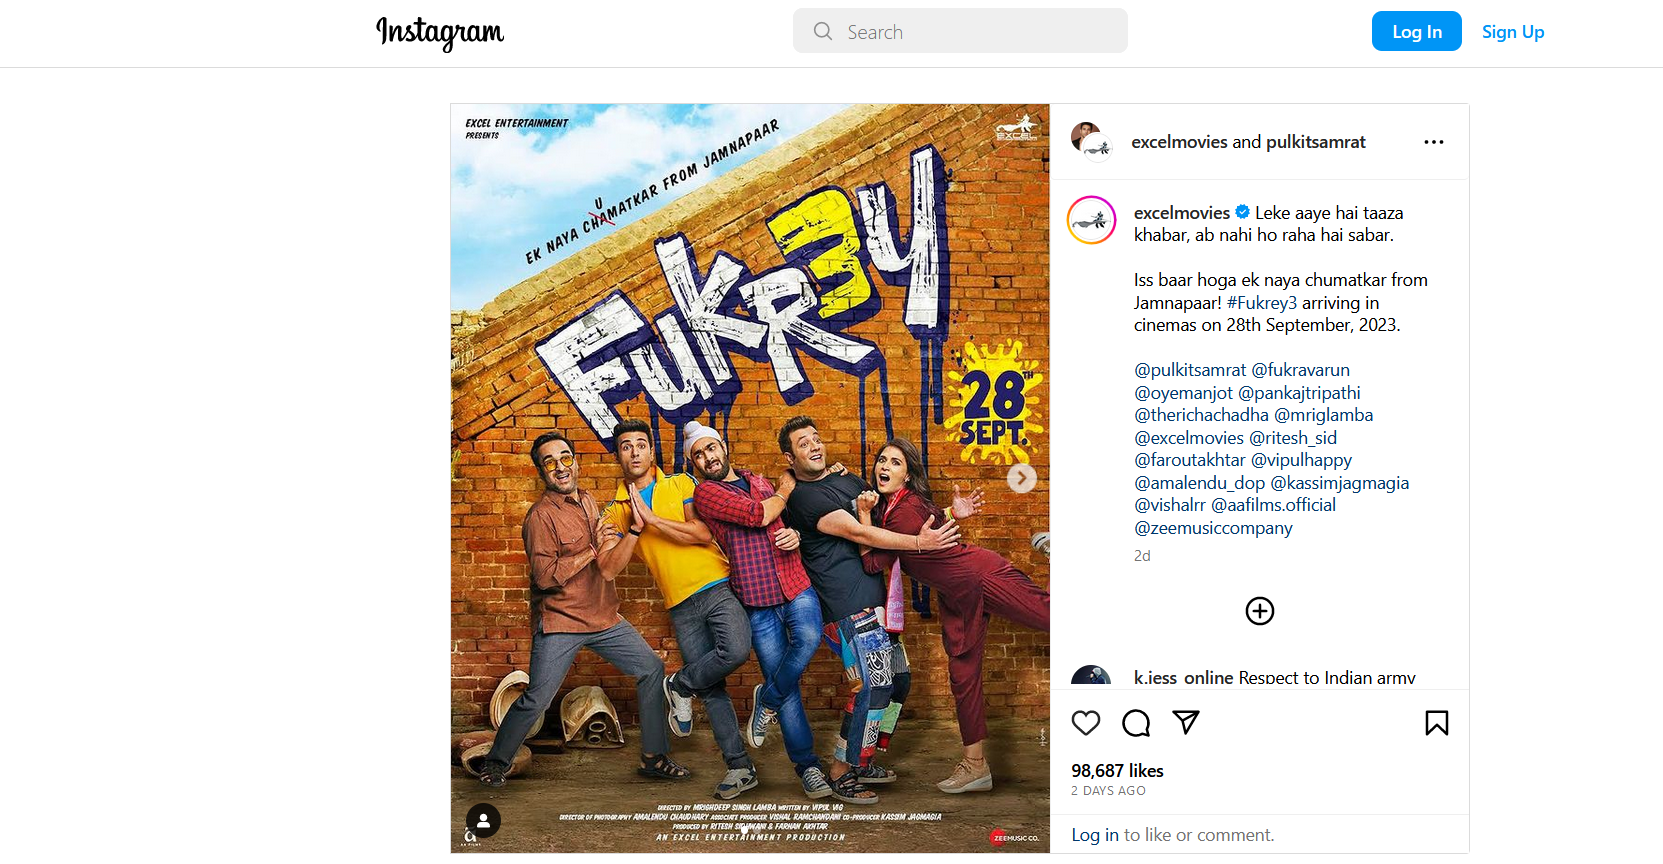 Fukrey 3 Trailer will out on 5 Sep